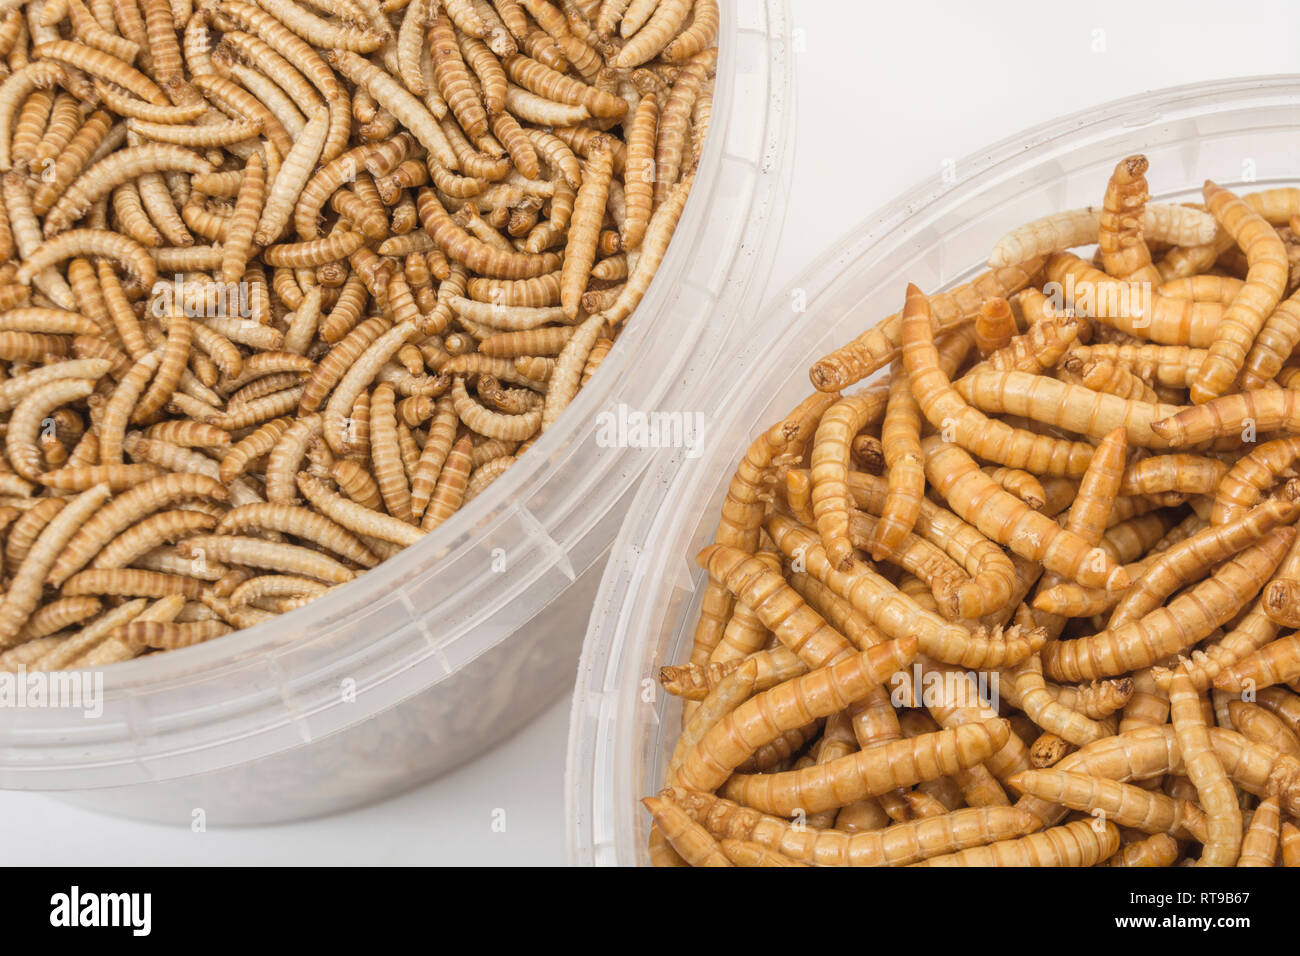 Edible Mealworms / Tenebrio molitor (R) & smaller Buffalo worms / Alphitobius diaperinus (L). Metaphor eating bugs, eating insects, Entomophagy. Stock Photo